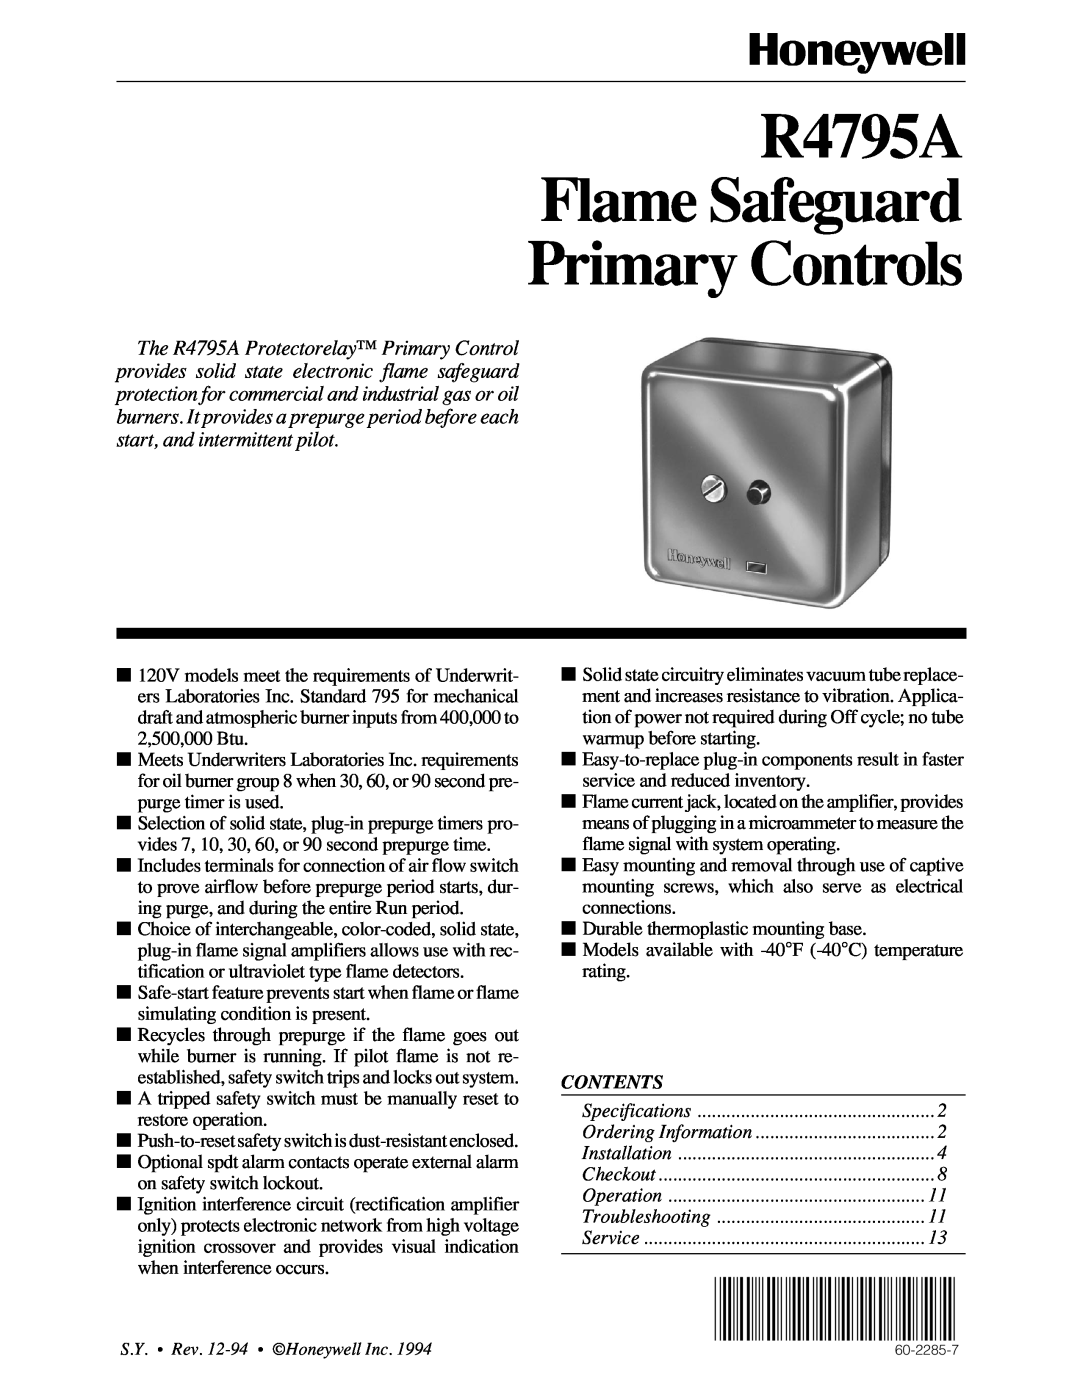 Honeywell specifications R4795A Flame Safeguard Primary Controls, Contents 